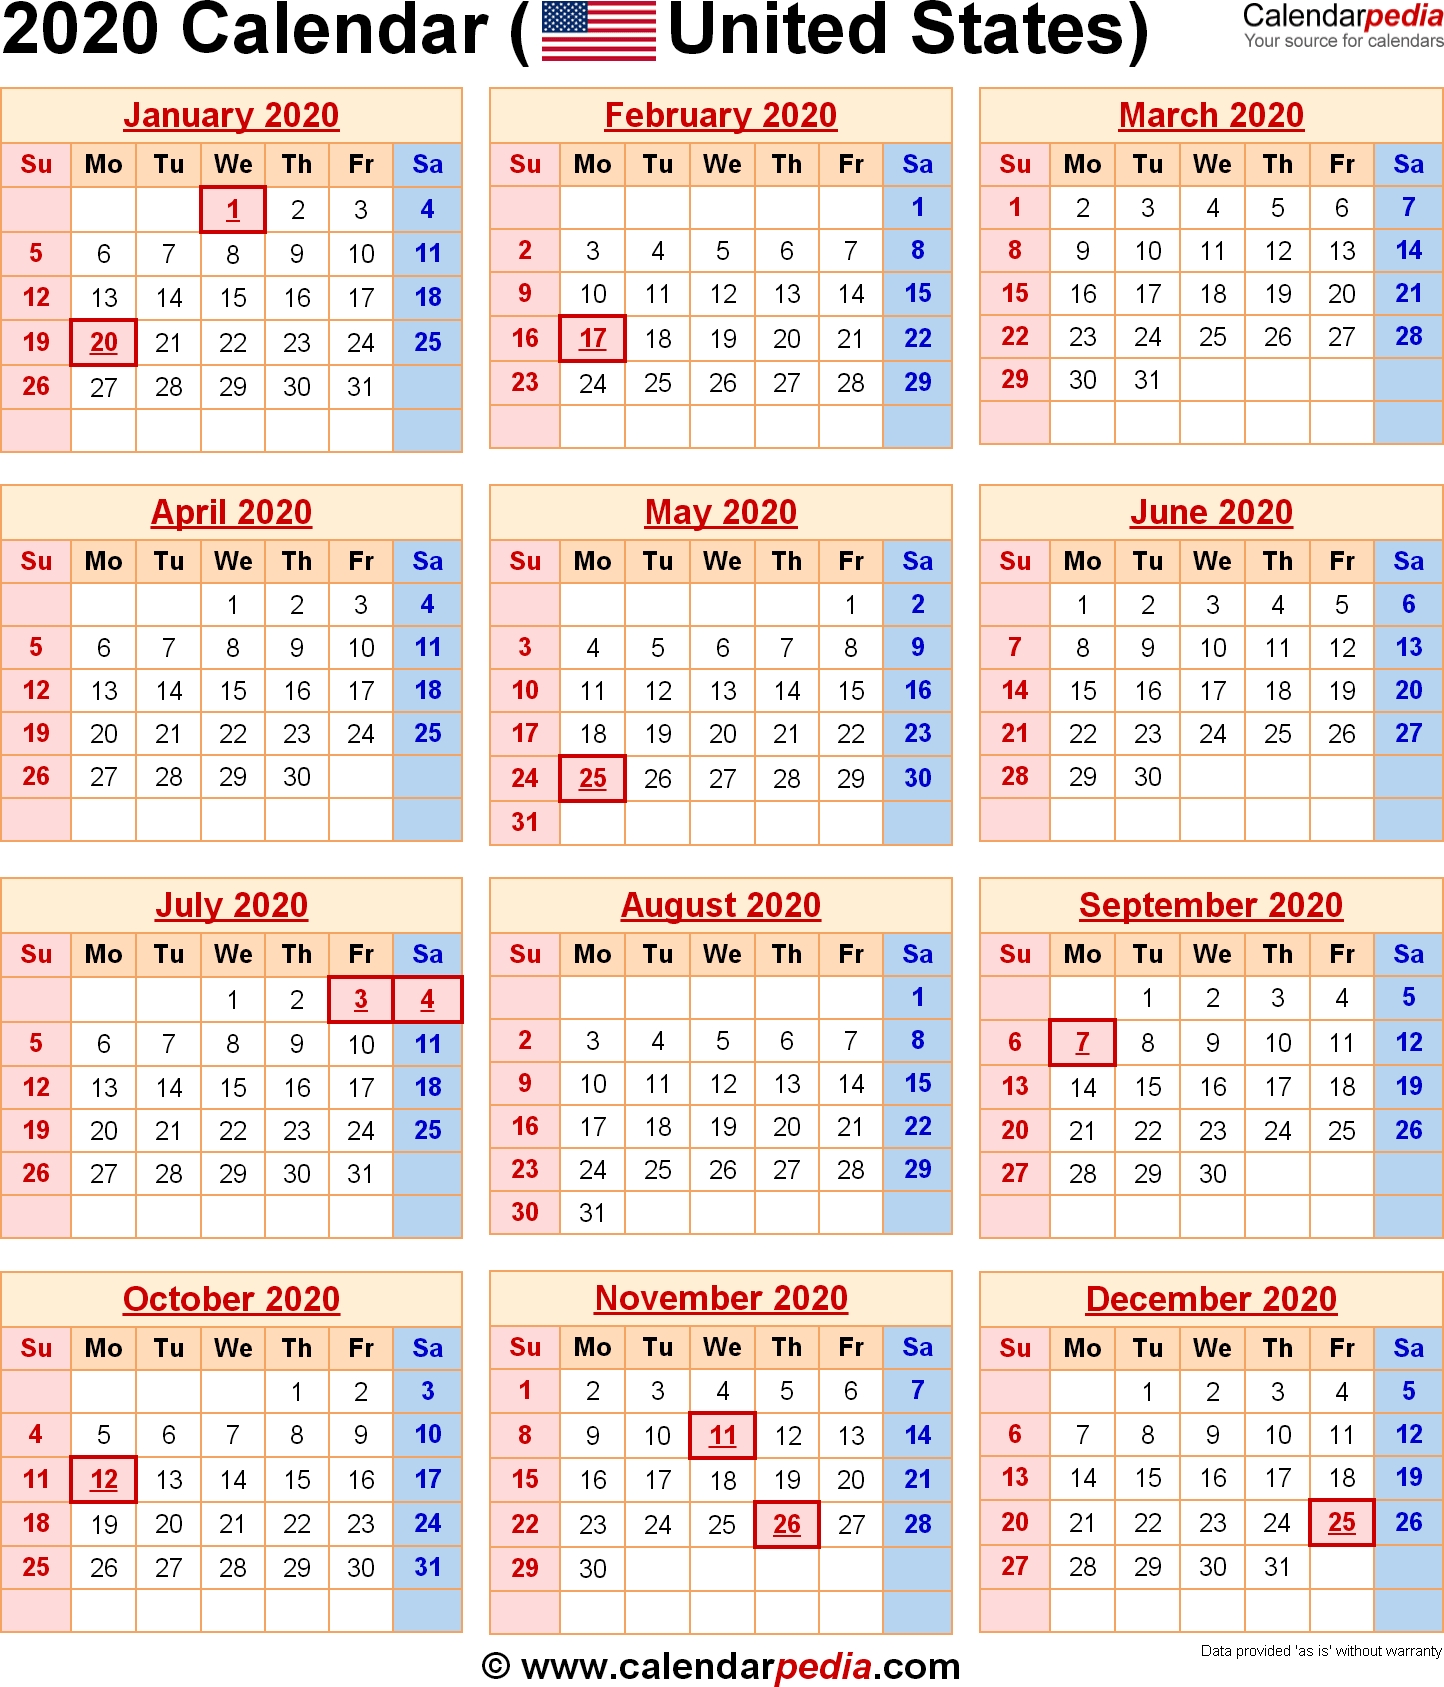 2020 Calendar With Federal Holidays Remarkable Printable 2020 Calendar Showing Federal Holidays